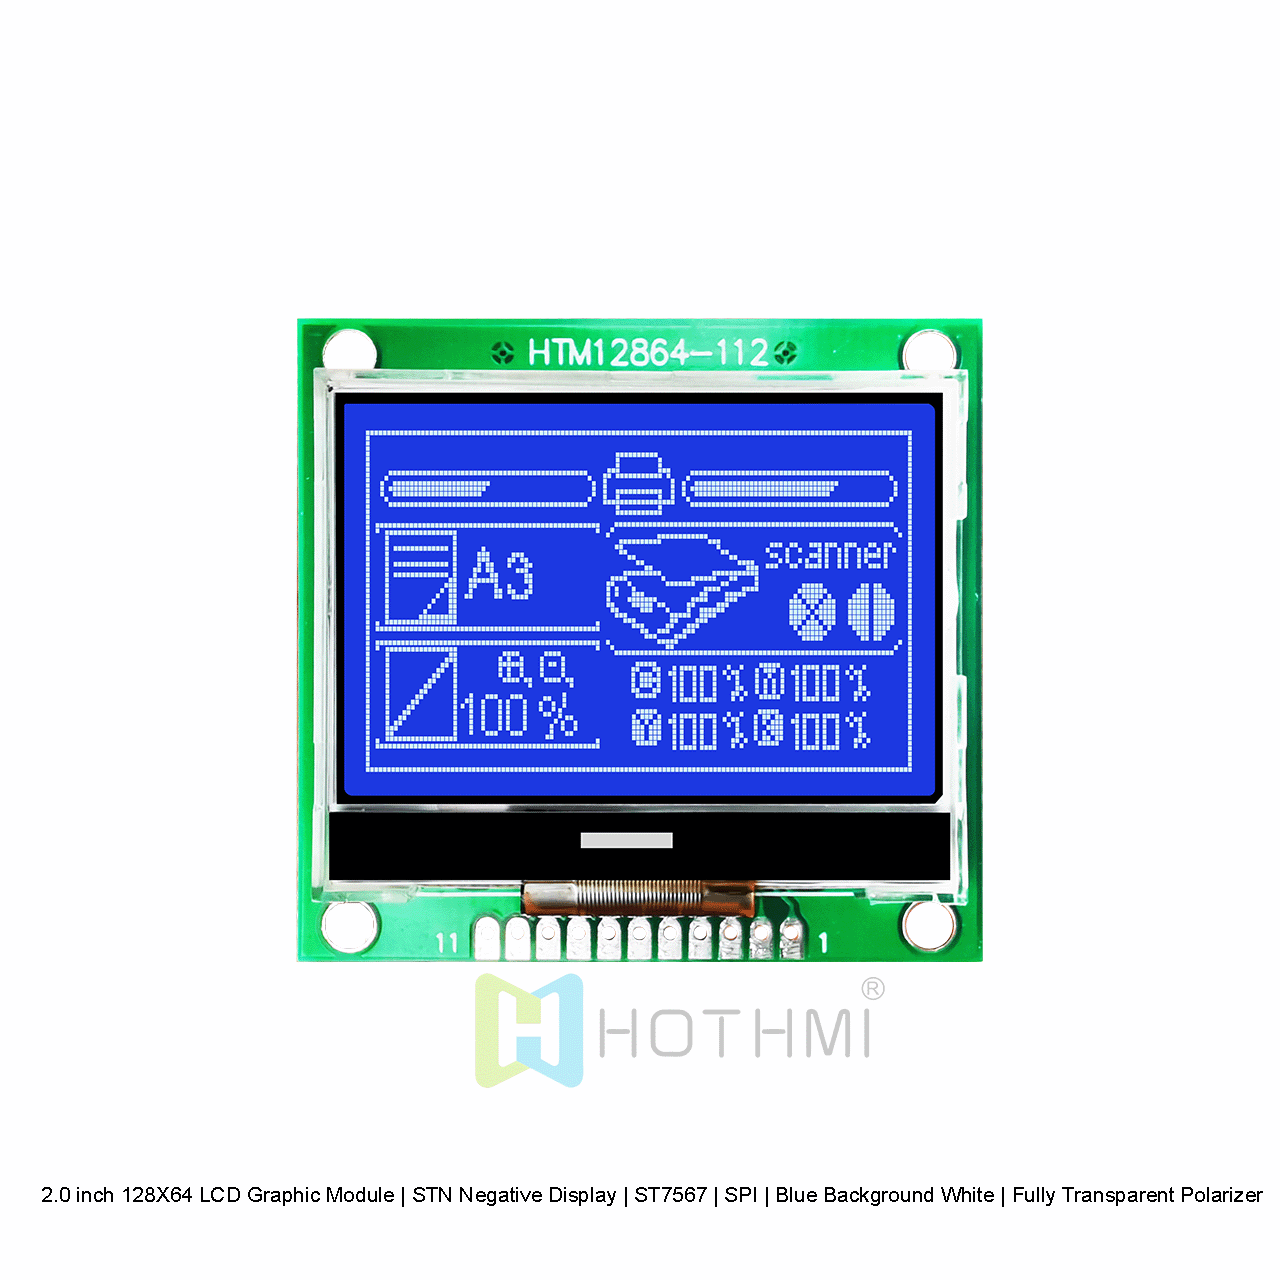 2.0 inch 128X64 LCD Graphic Module | STN Negative Display | ST7567 | SPI | Blue Background White | Fully Transparent Polarizer arduino